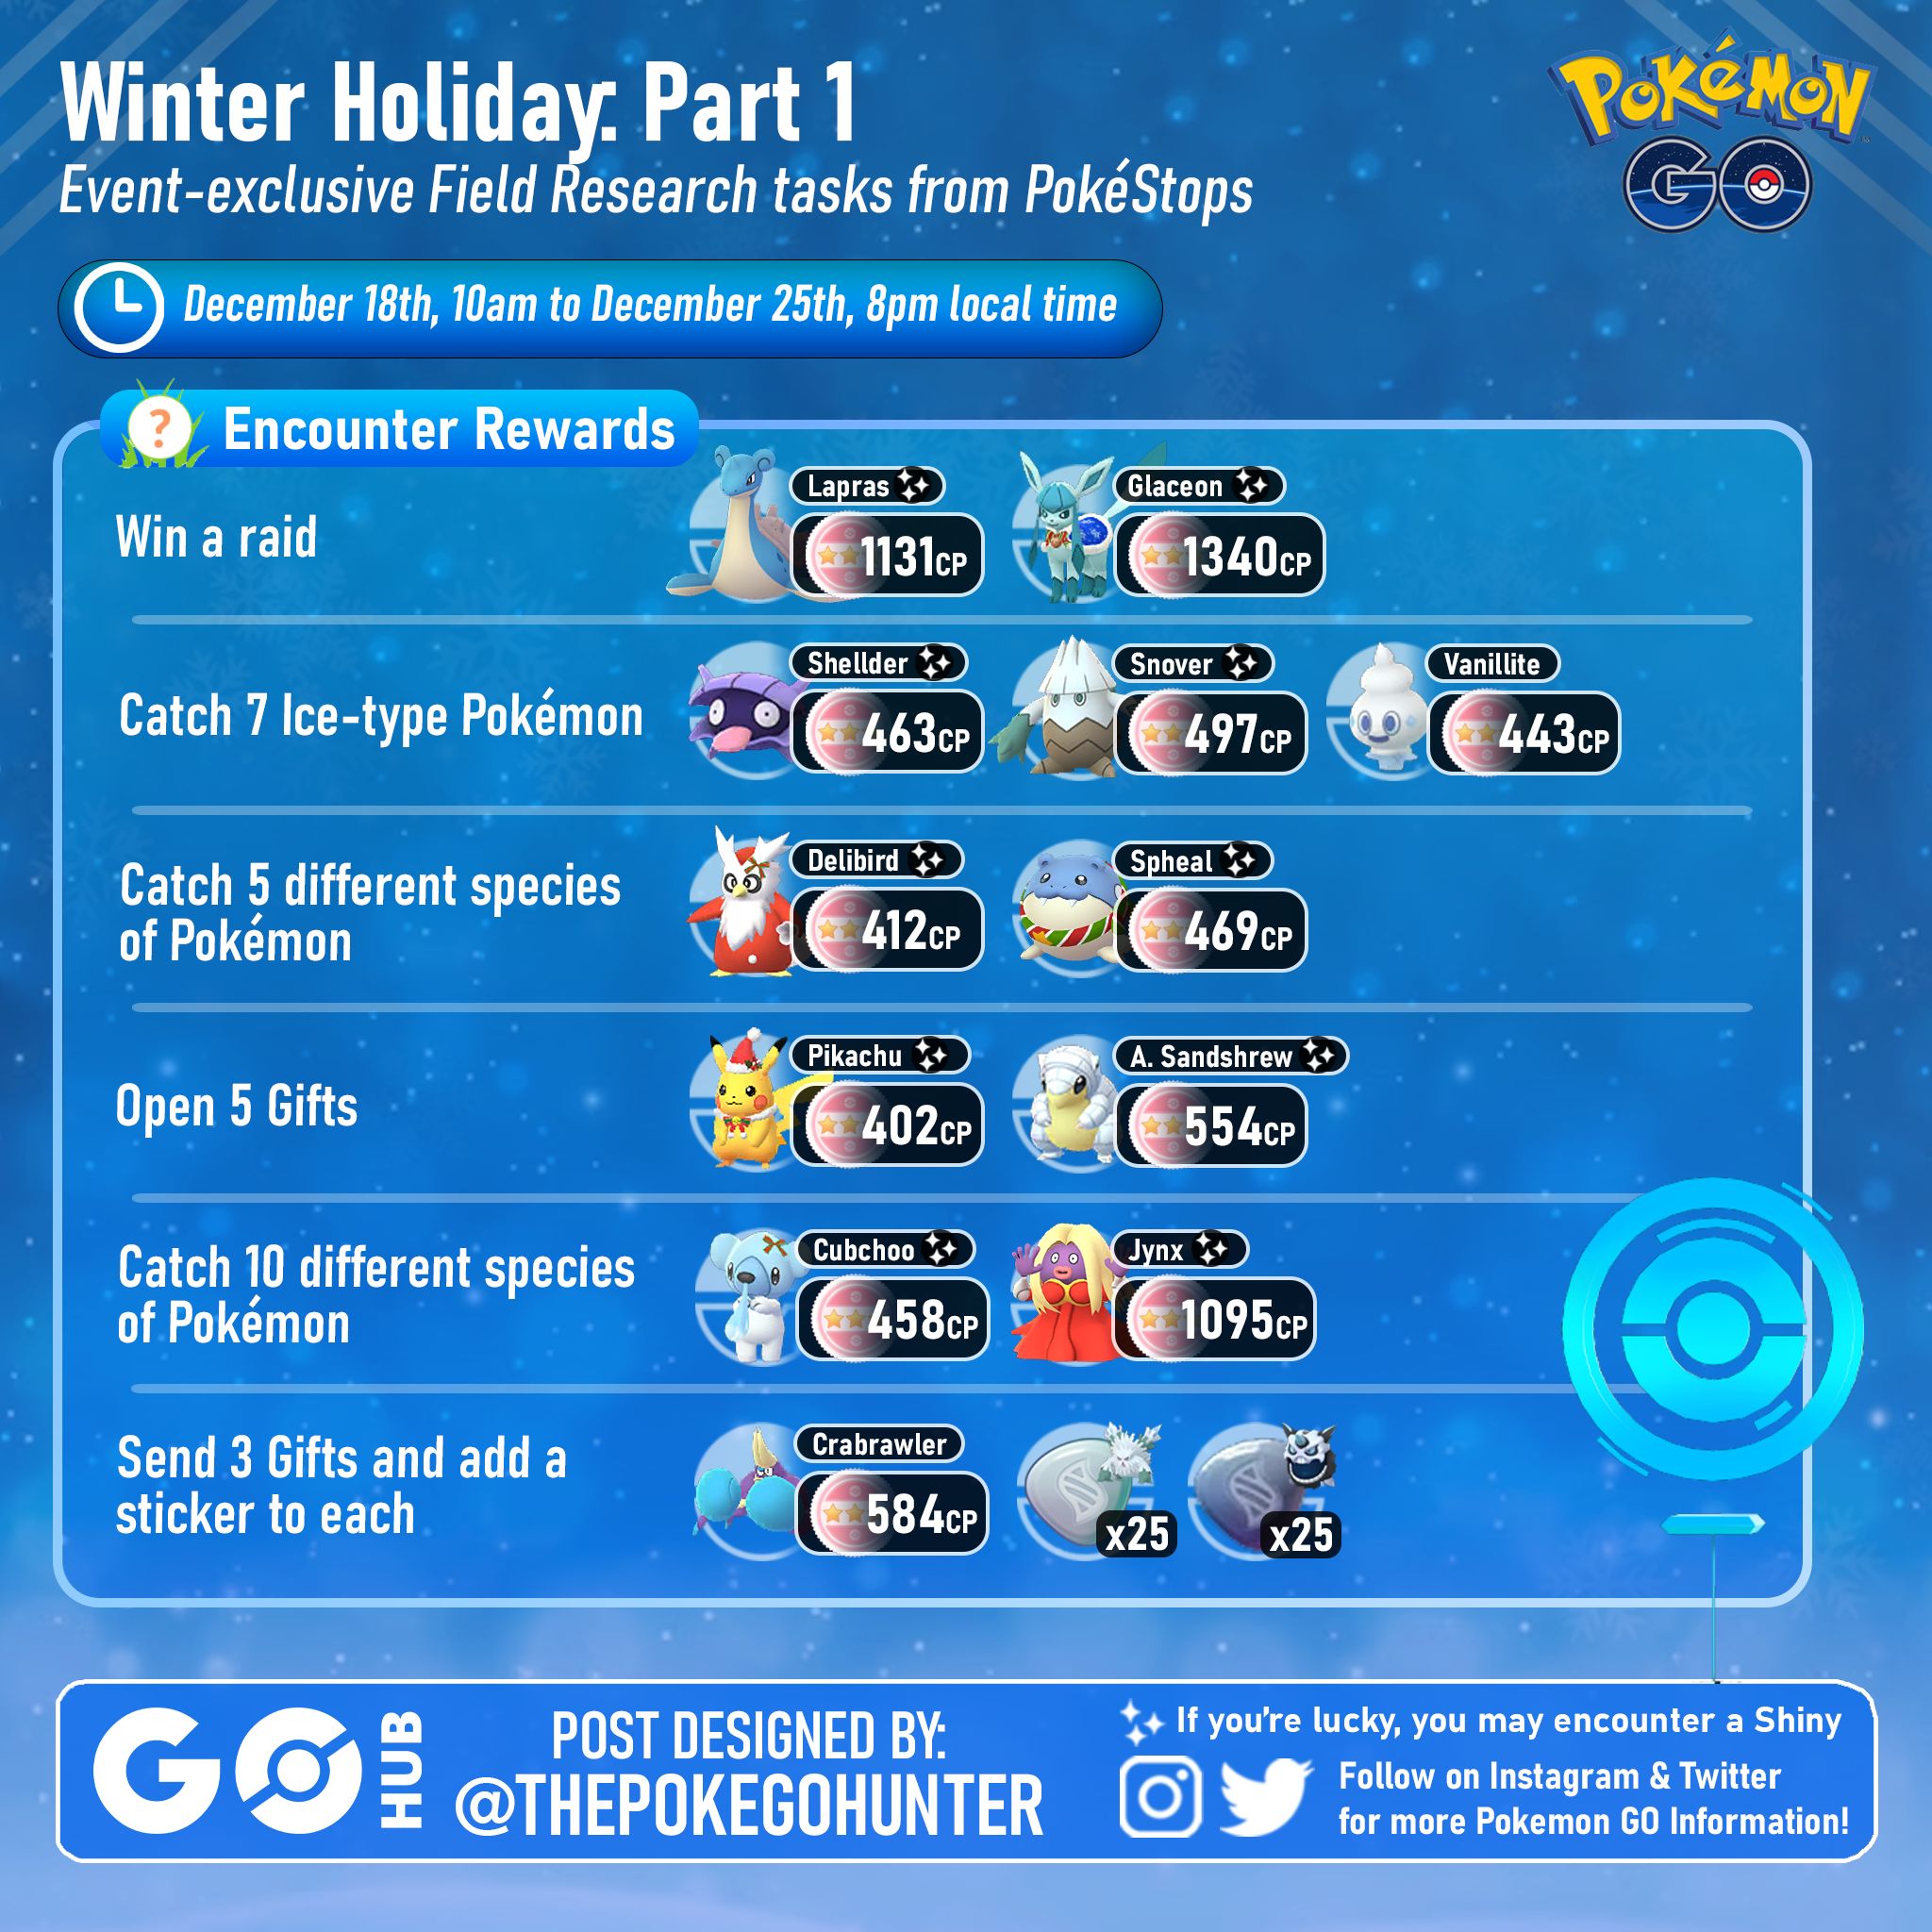 A PvP Field Guide for December 2020 Community Day